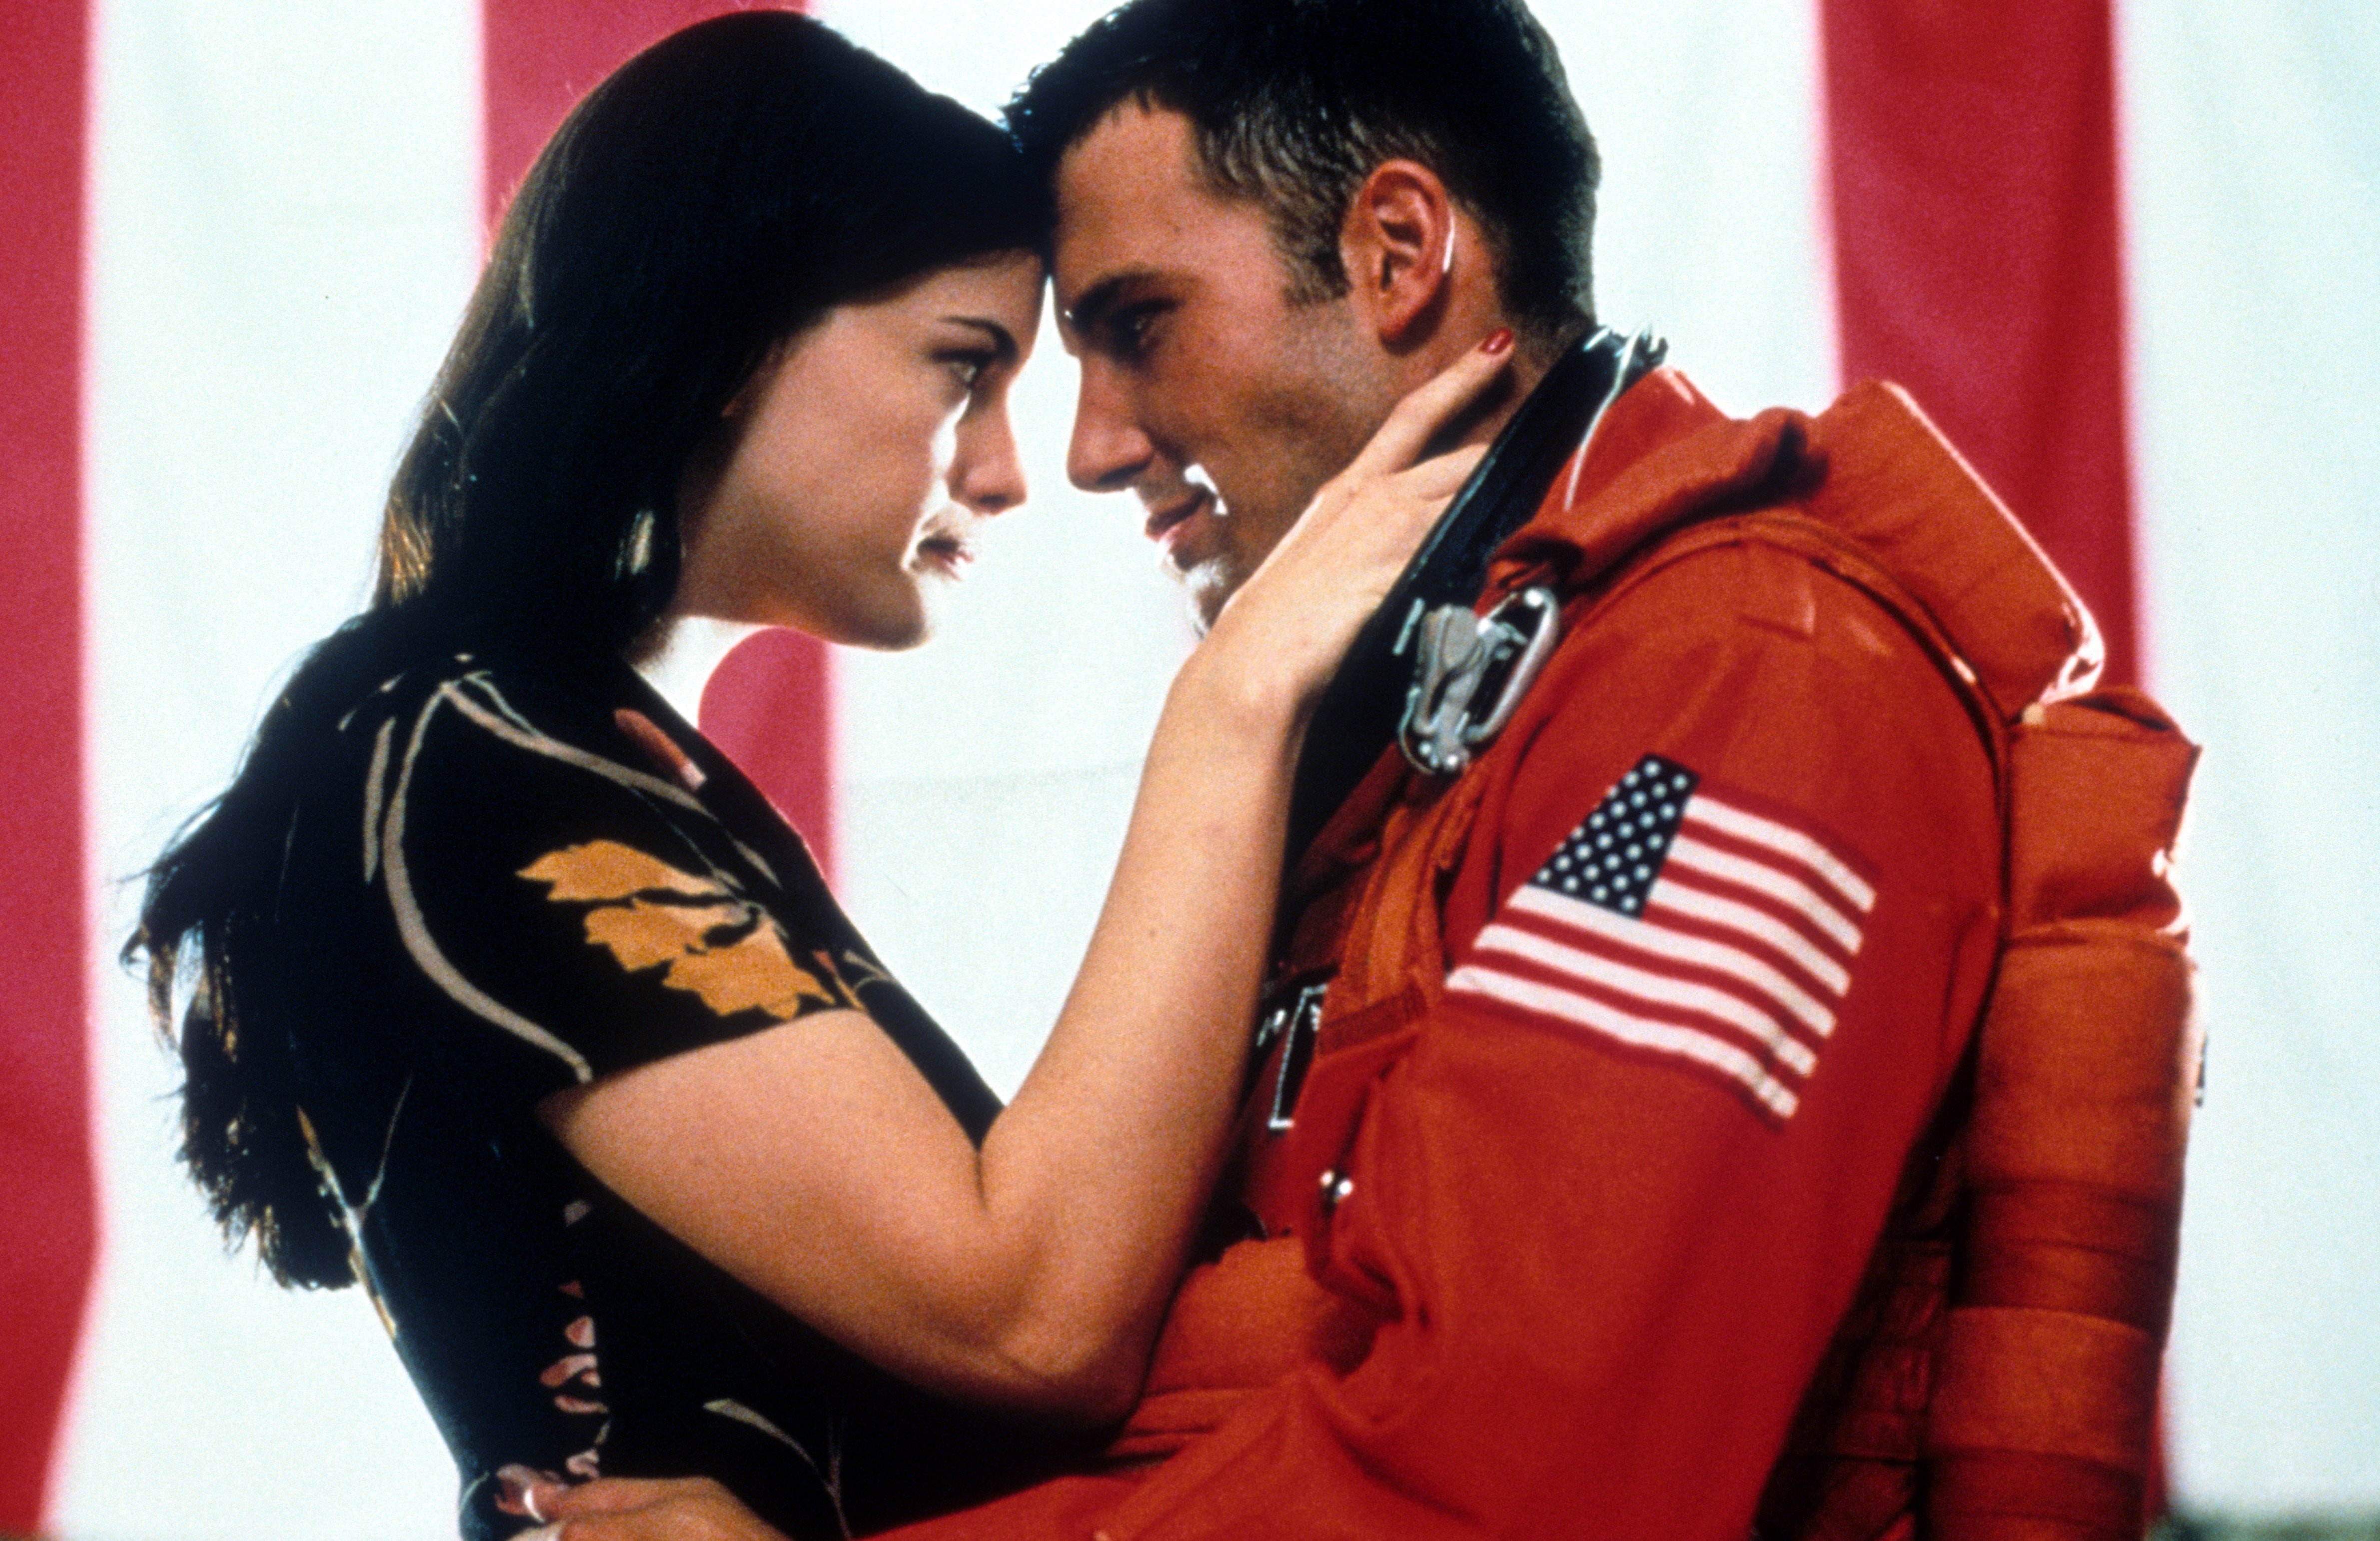 Ben Affleck with co-star Liv Tyler in a scene from the film "Armageddon" in 1998 | Source: Getty Images